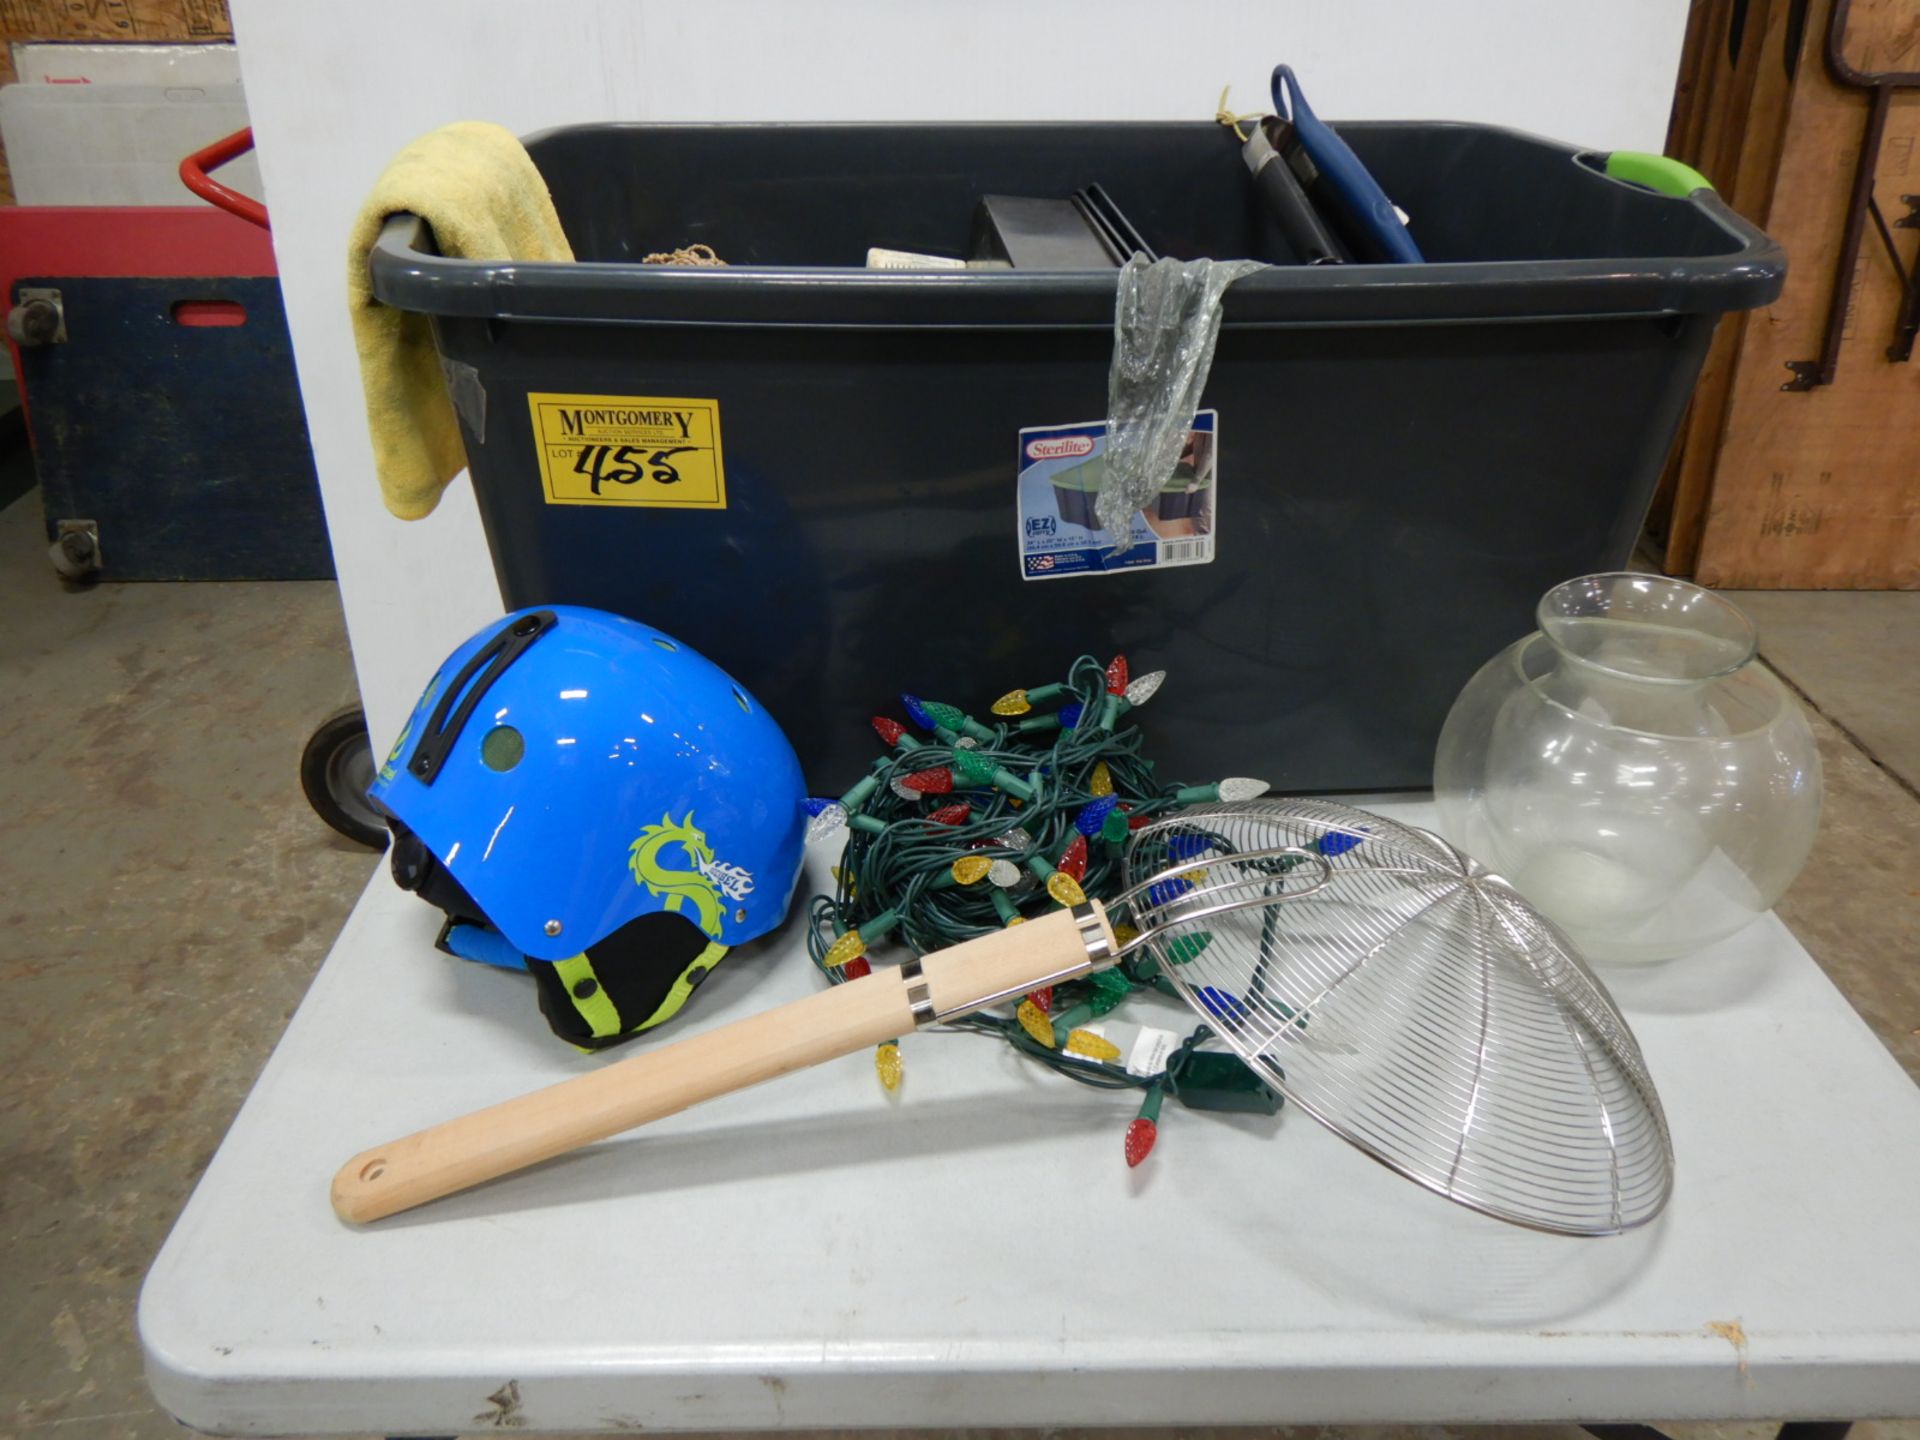 L/O ASSORTED HOUSE HOLD PRODUCTS, BBQ UTENSILS, CHRISTMAS LIGHTS, BIKE HELMET, ETC. - Image 2 of 4